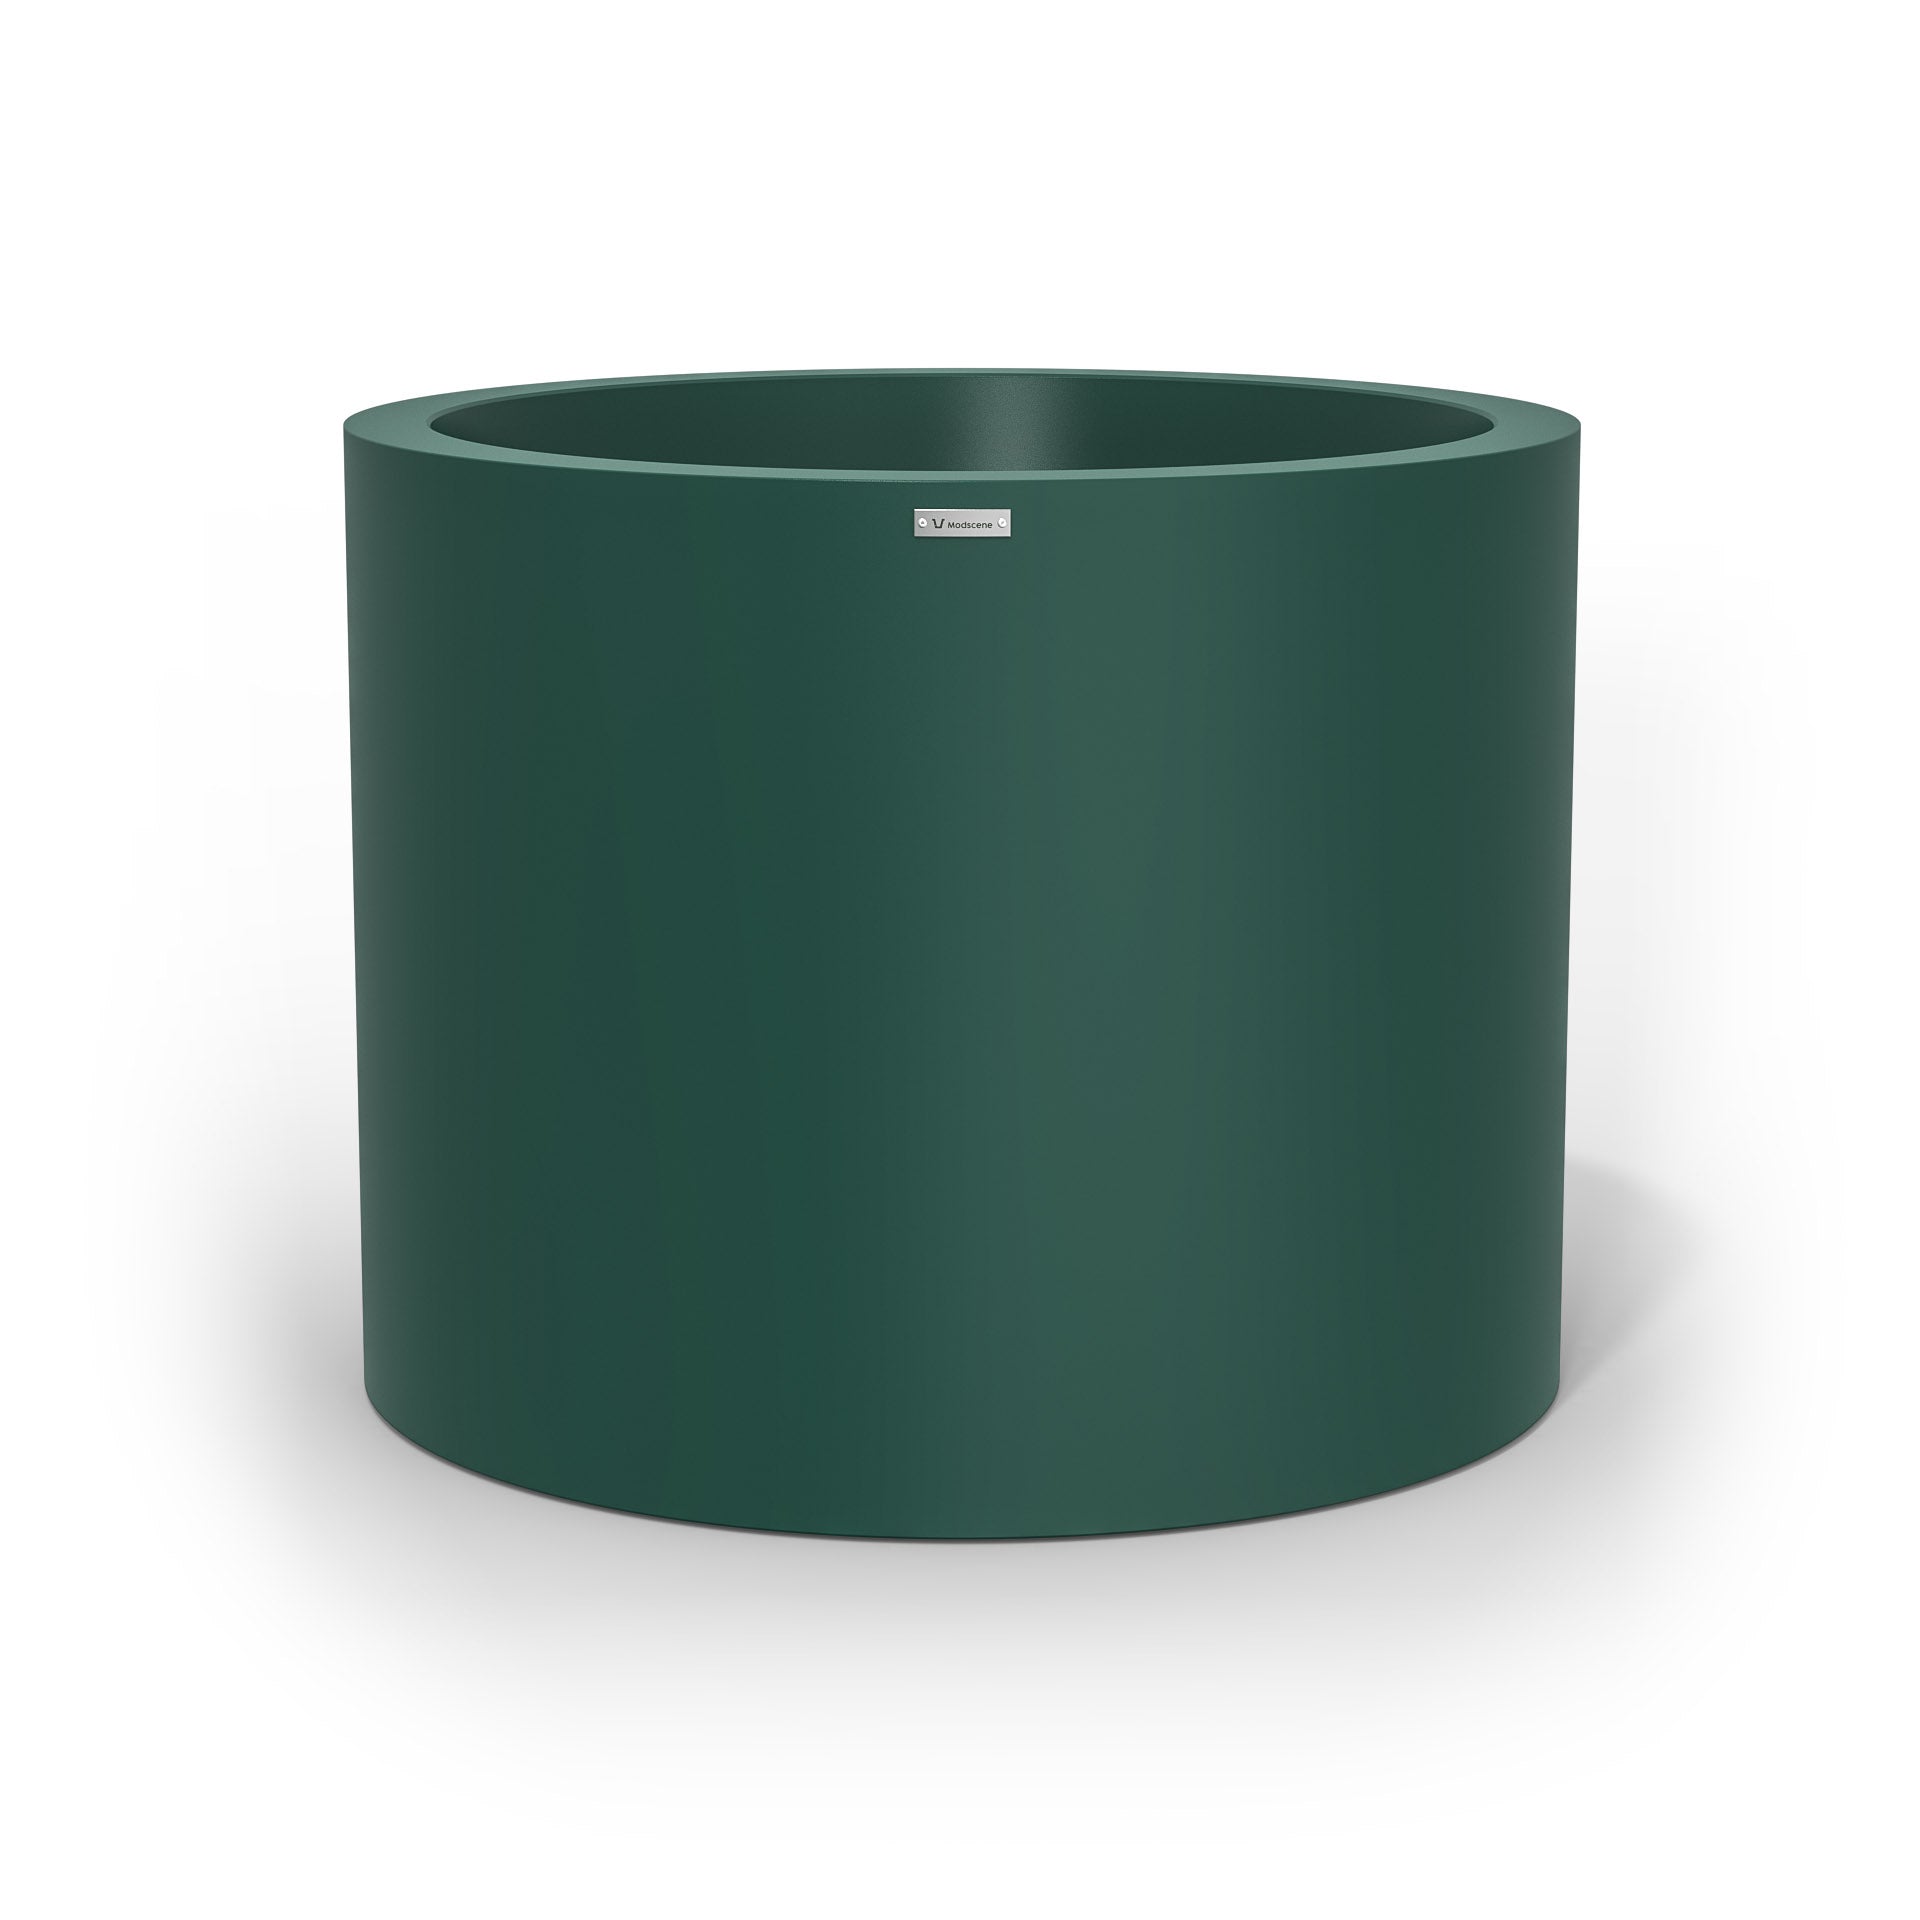 An extra large cylinder pot planter in an emerald green colour. Made by Modscene NZ.